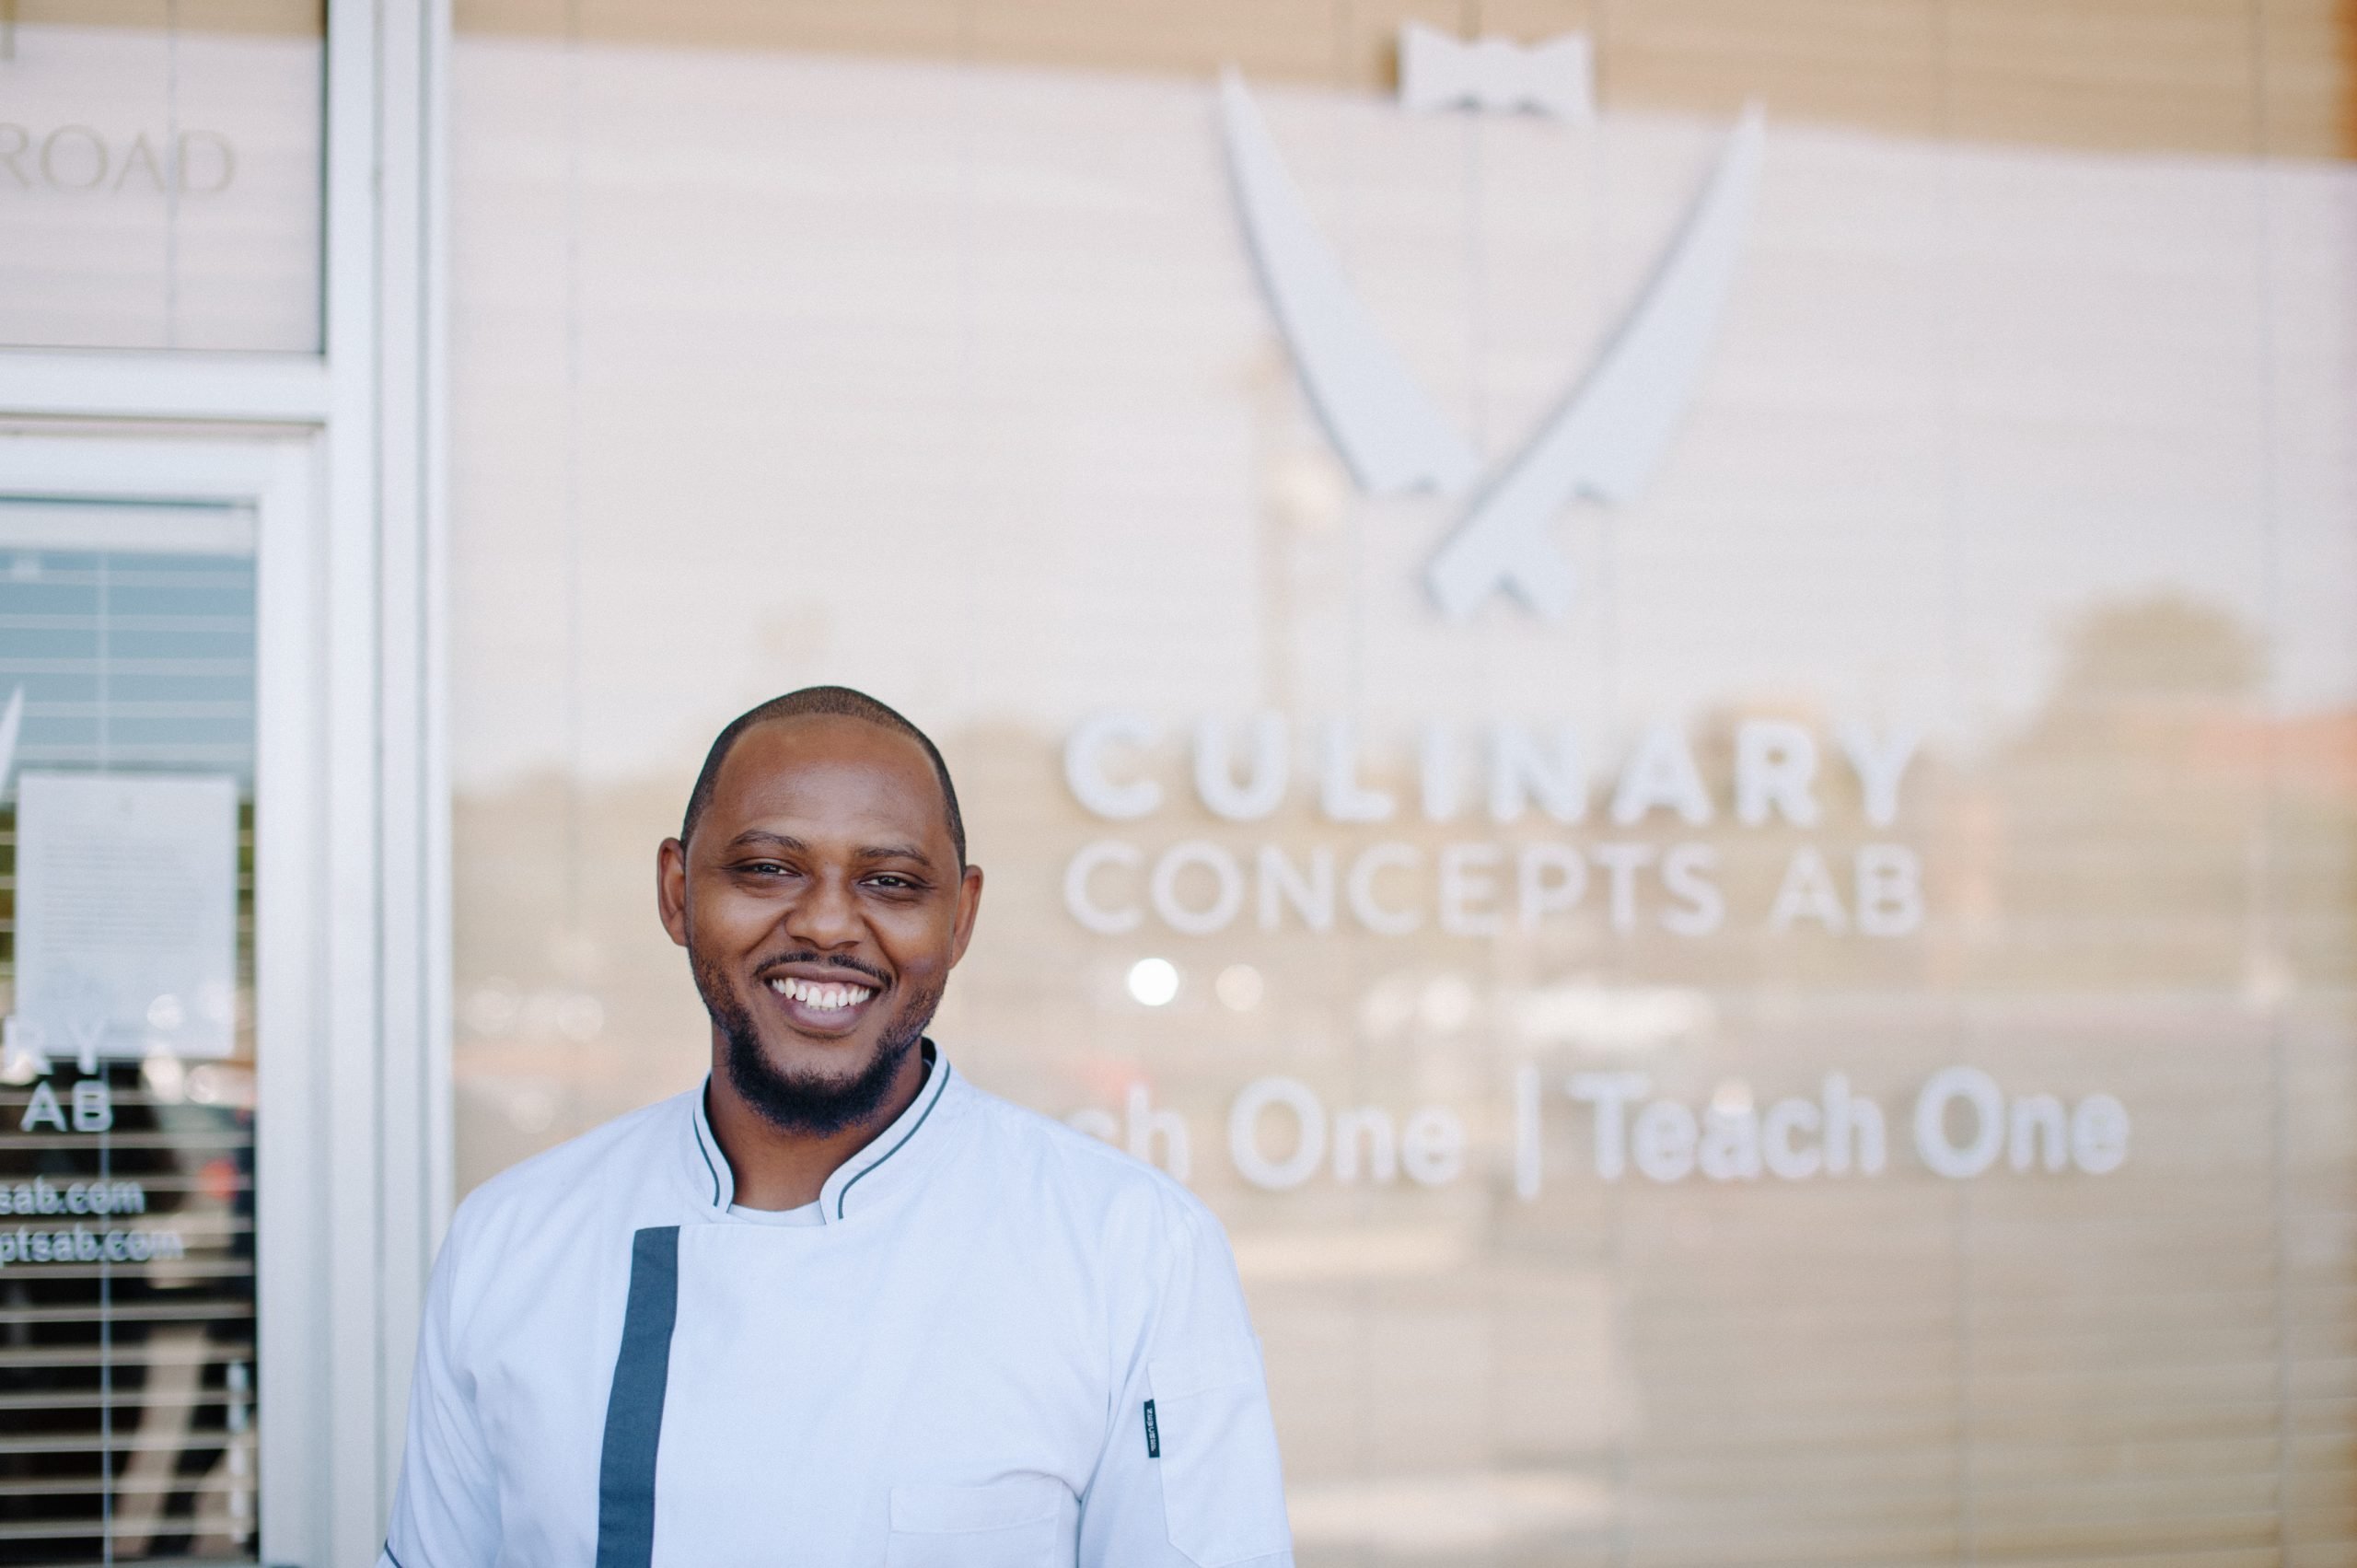 Man in chef coat in front of storefront window with sign "Culinary Concepts AB"